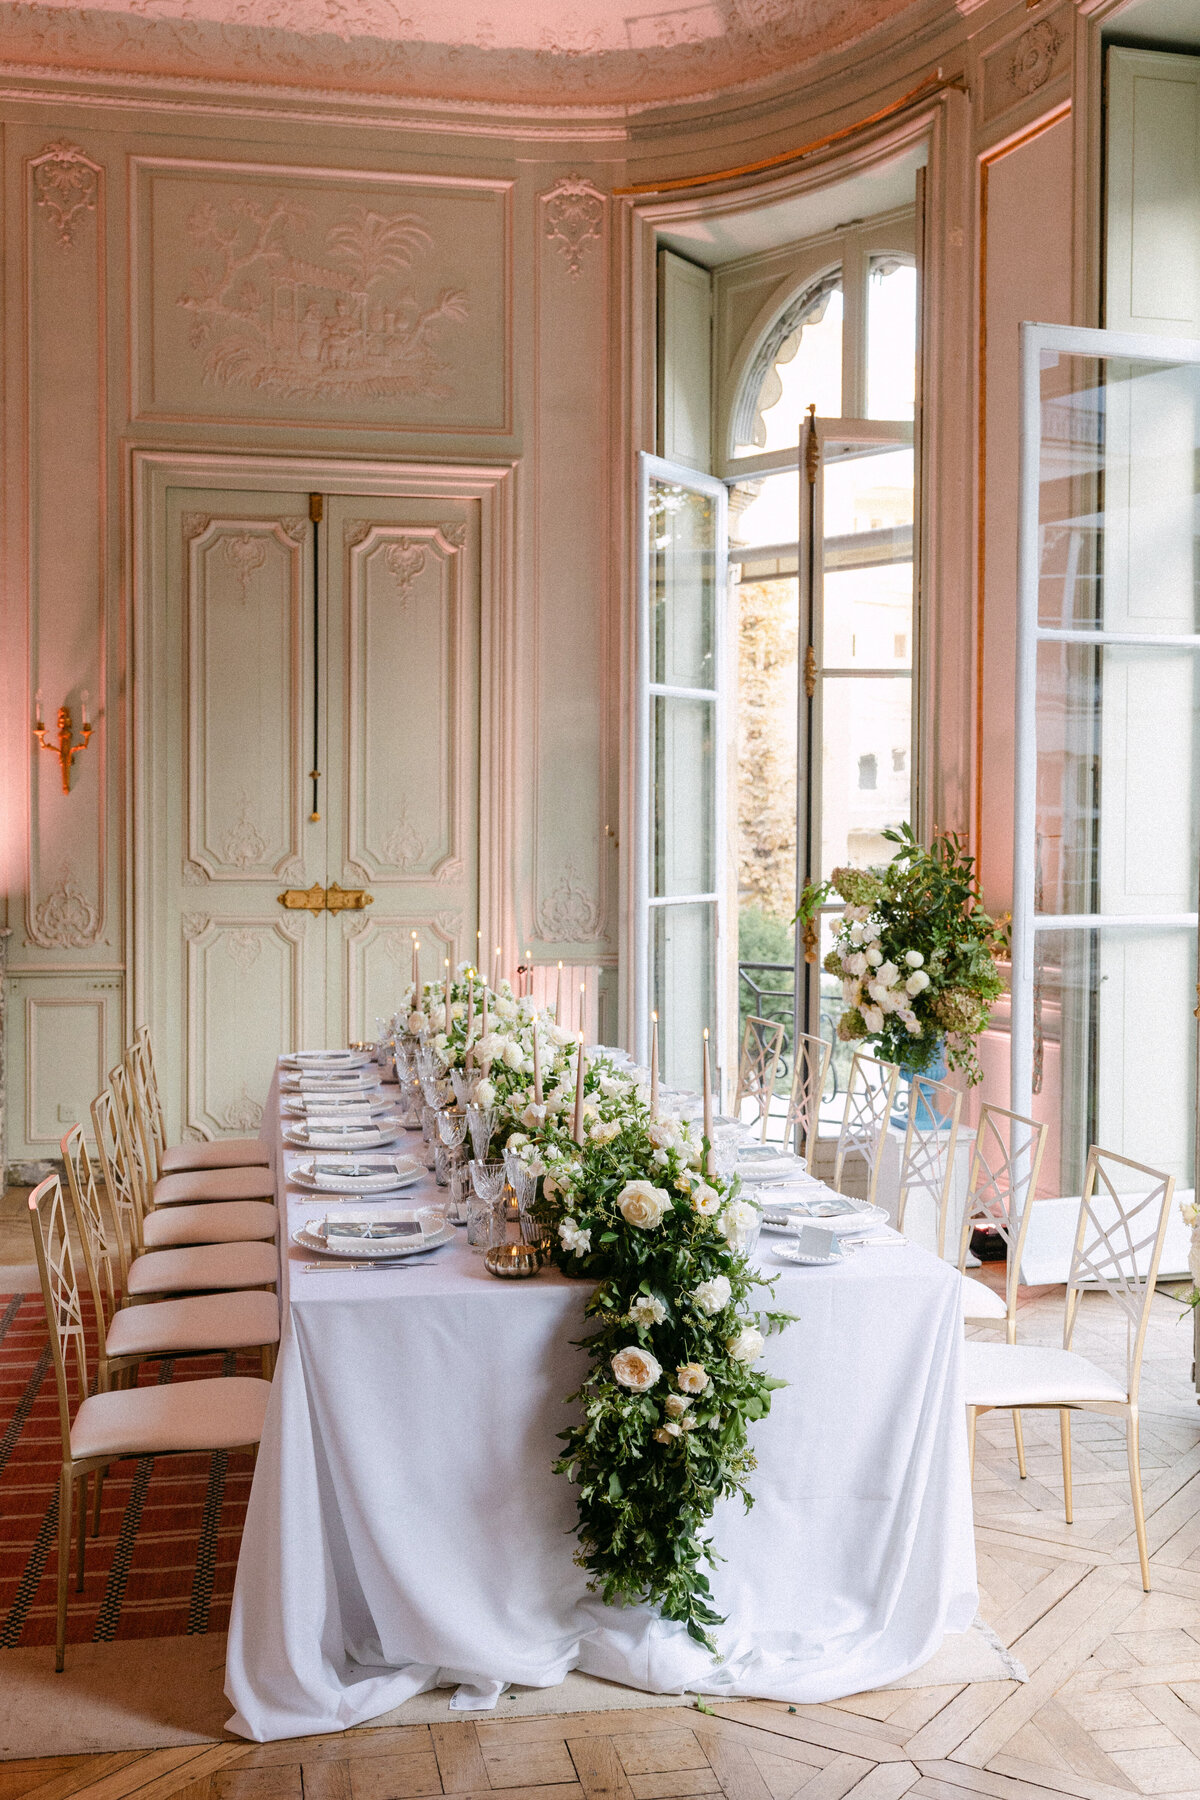 Jennifer Fox Weddings English speaking wedding planning & design agency in France crafting refined and bespoke weddings and celebrations Provence, Paris and destination wd788